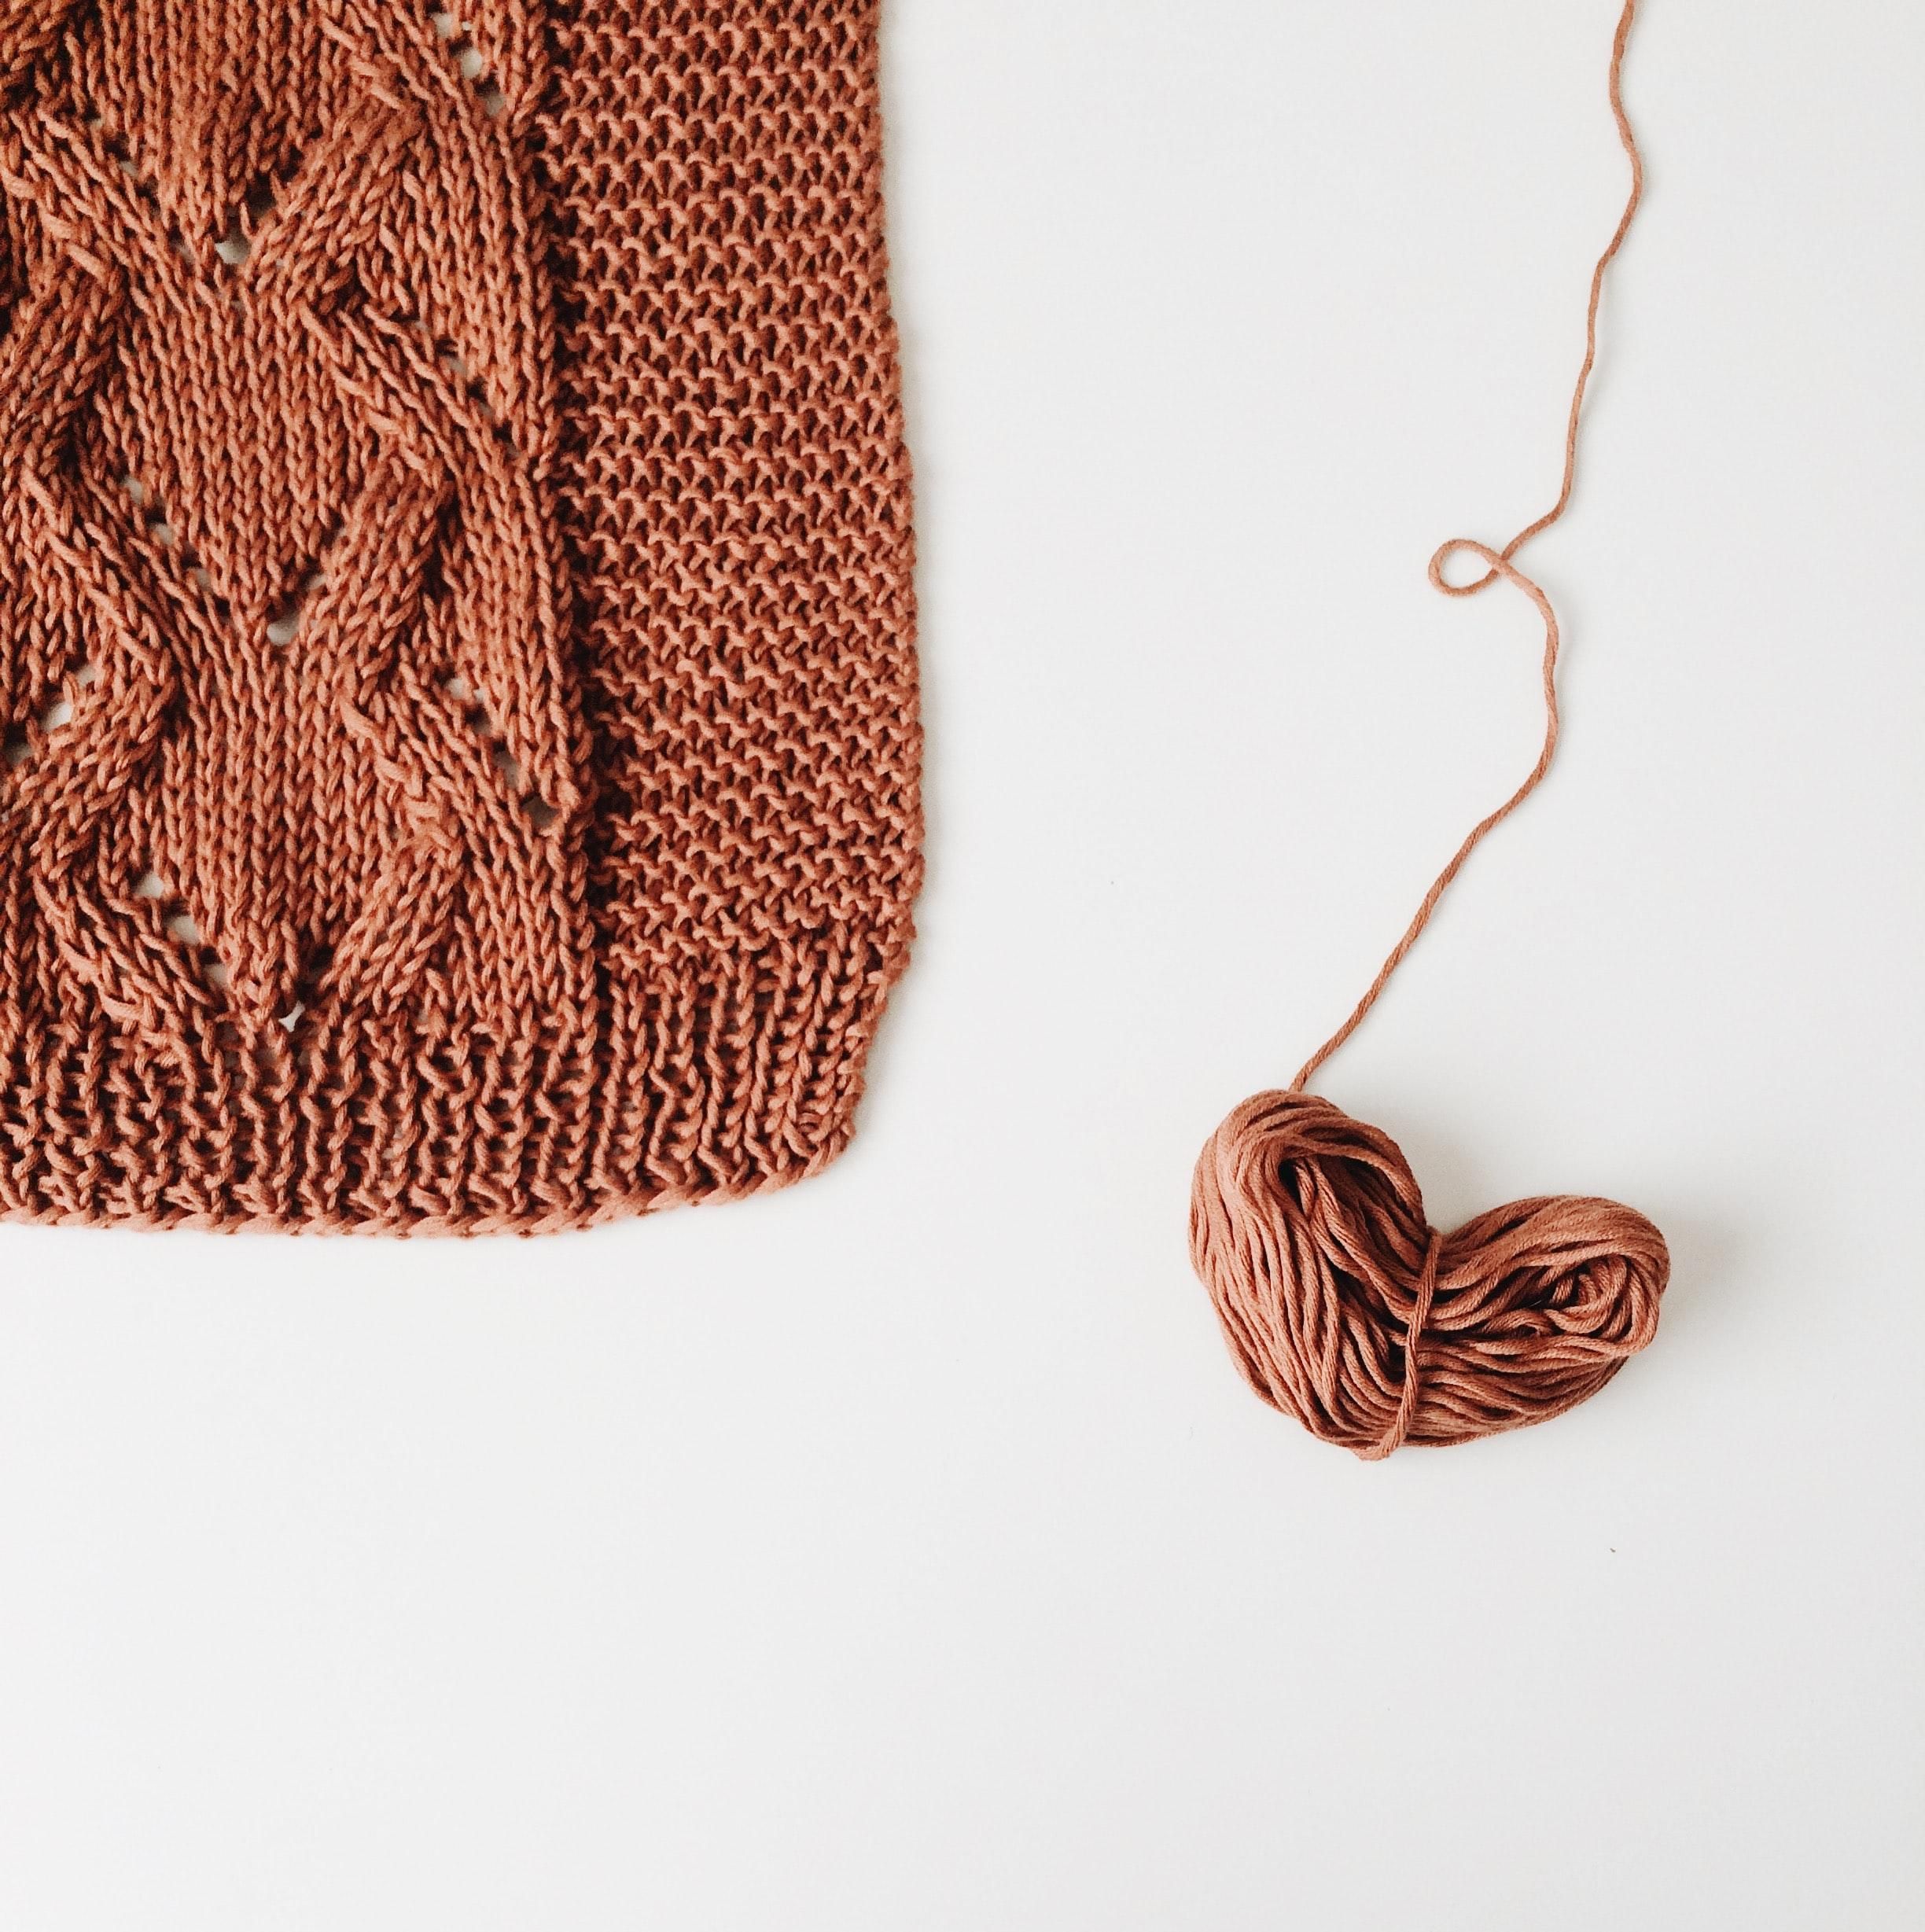 Loose Ends finishes knitting projects of those who've died - Upworthy